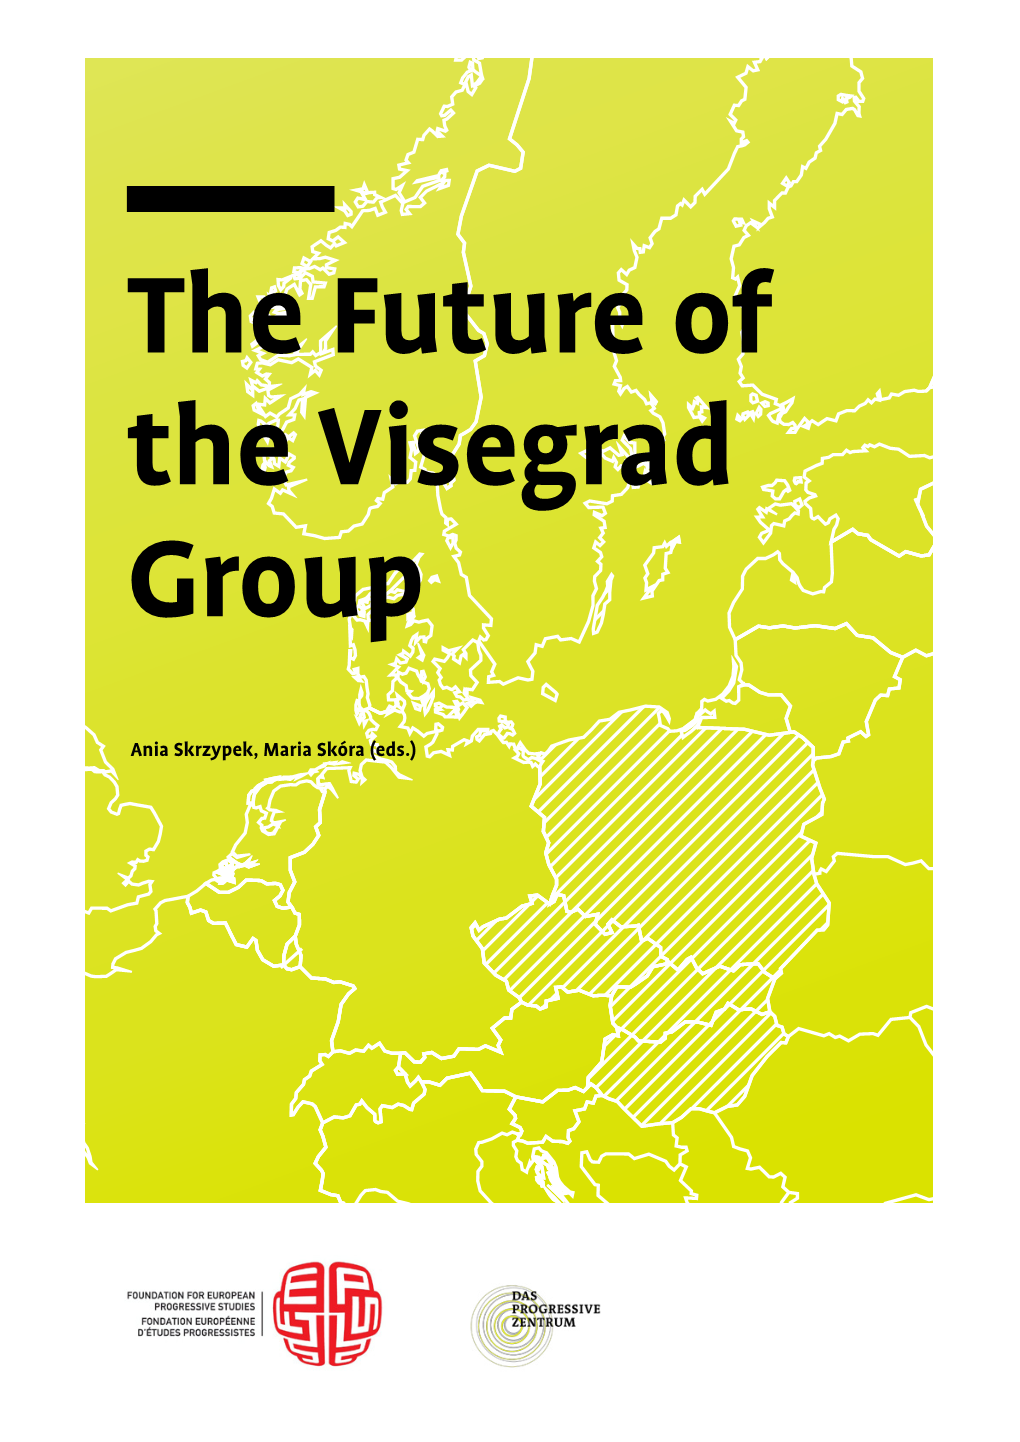 The Future of the Visegrad Group